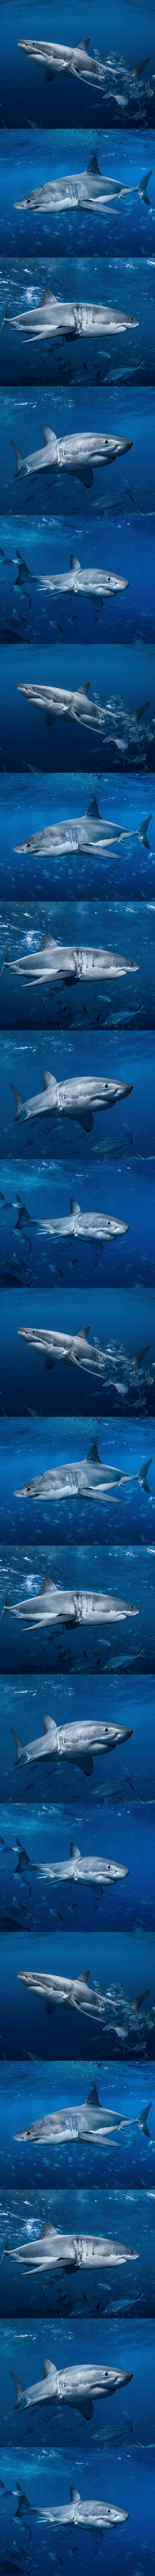 Jawsome - Great White Sharks collection image